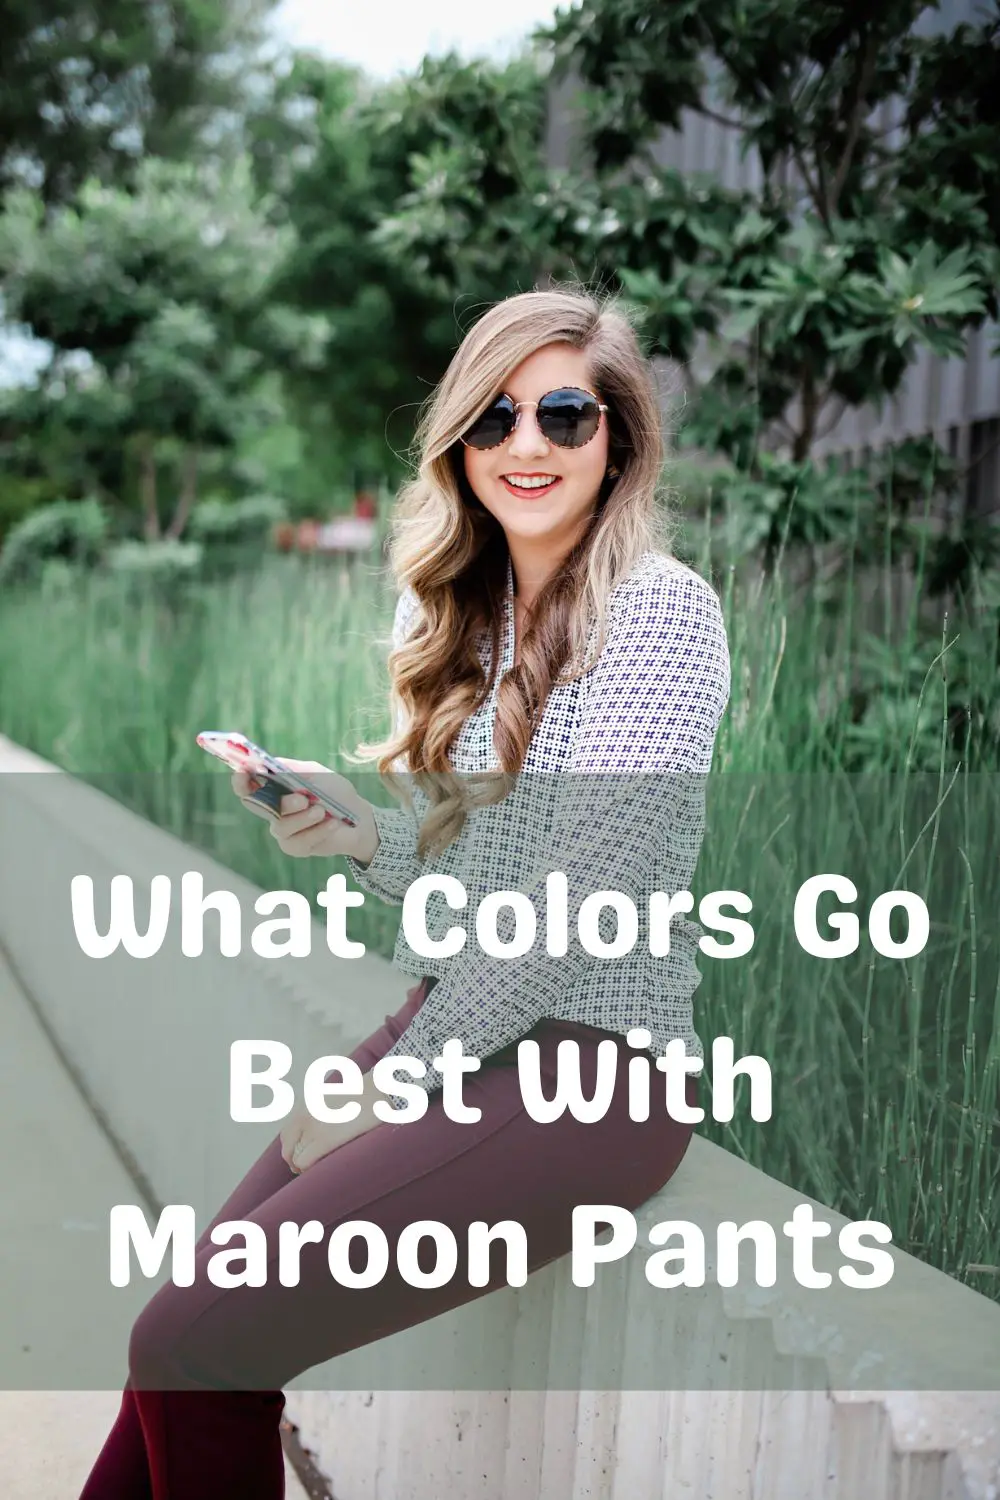 What Colors Go Best With Maroon Pants